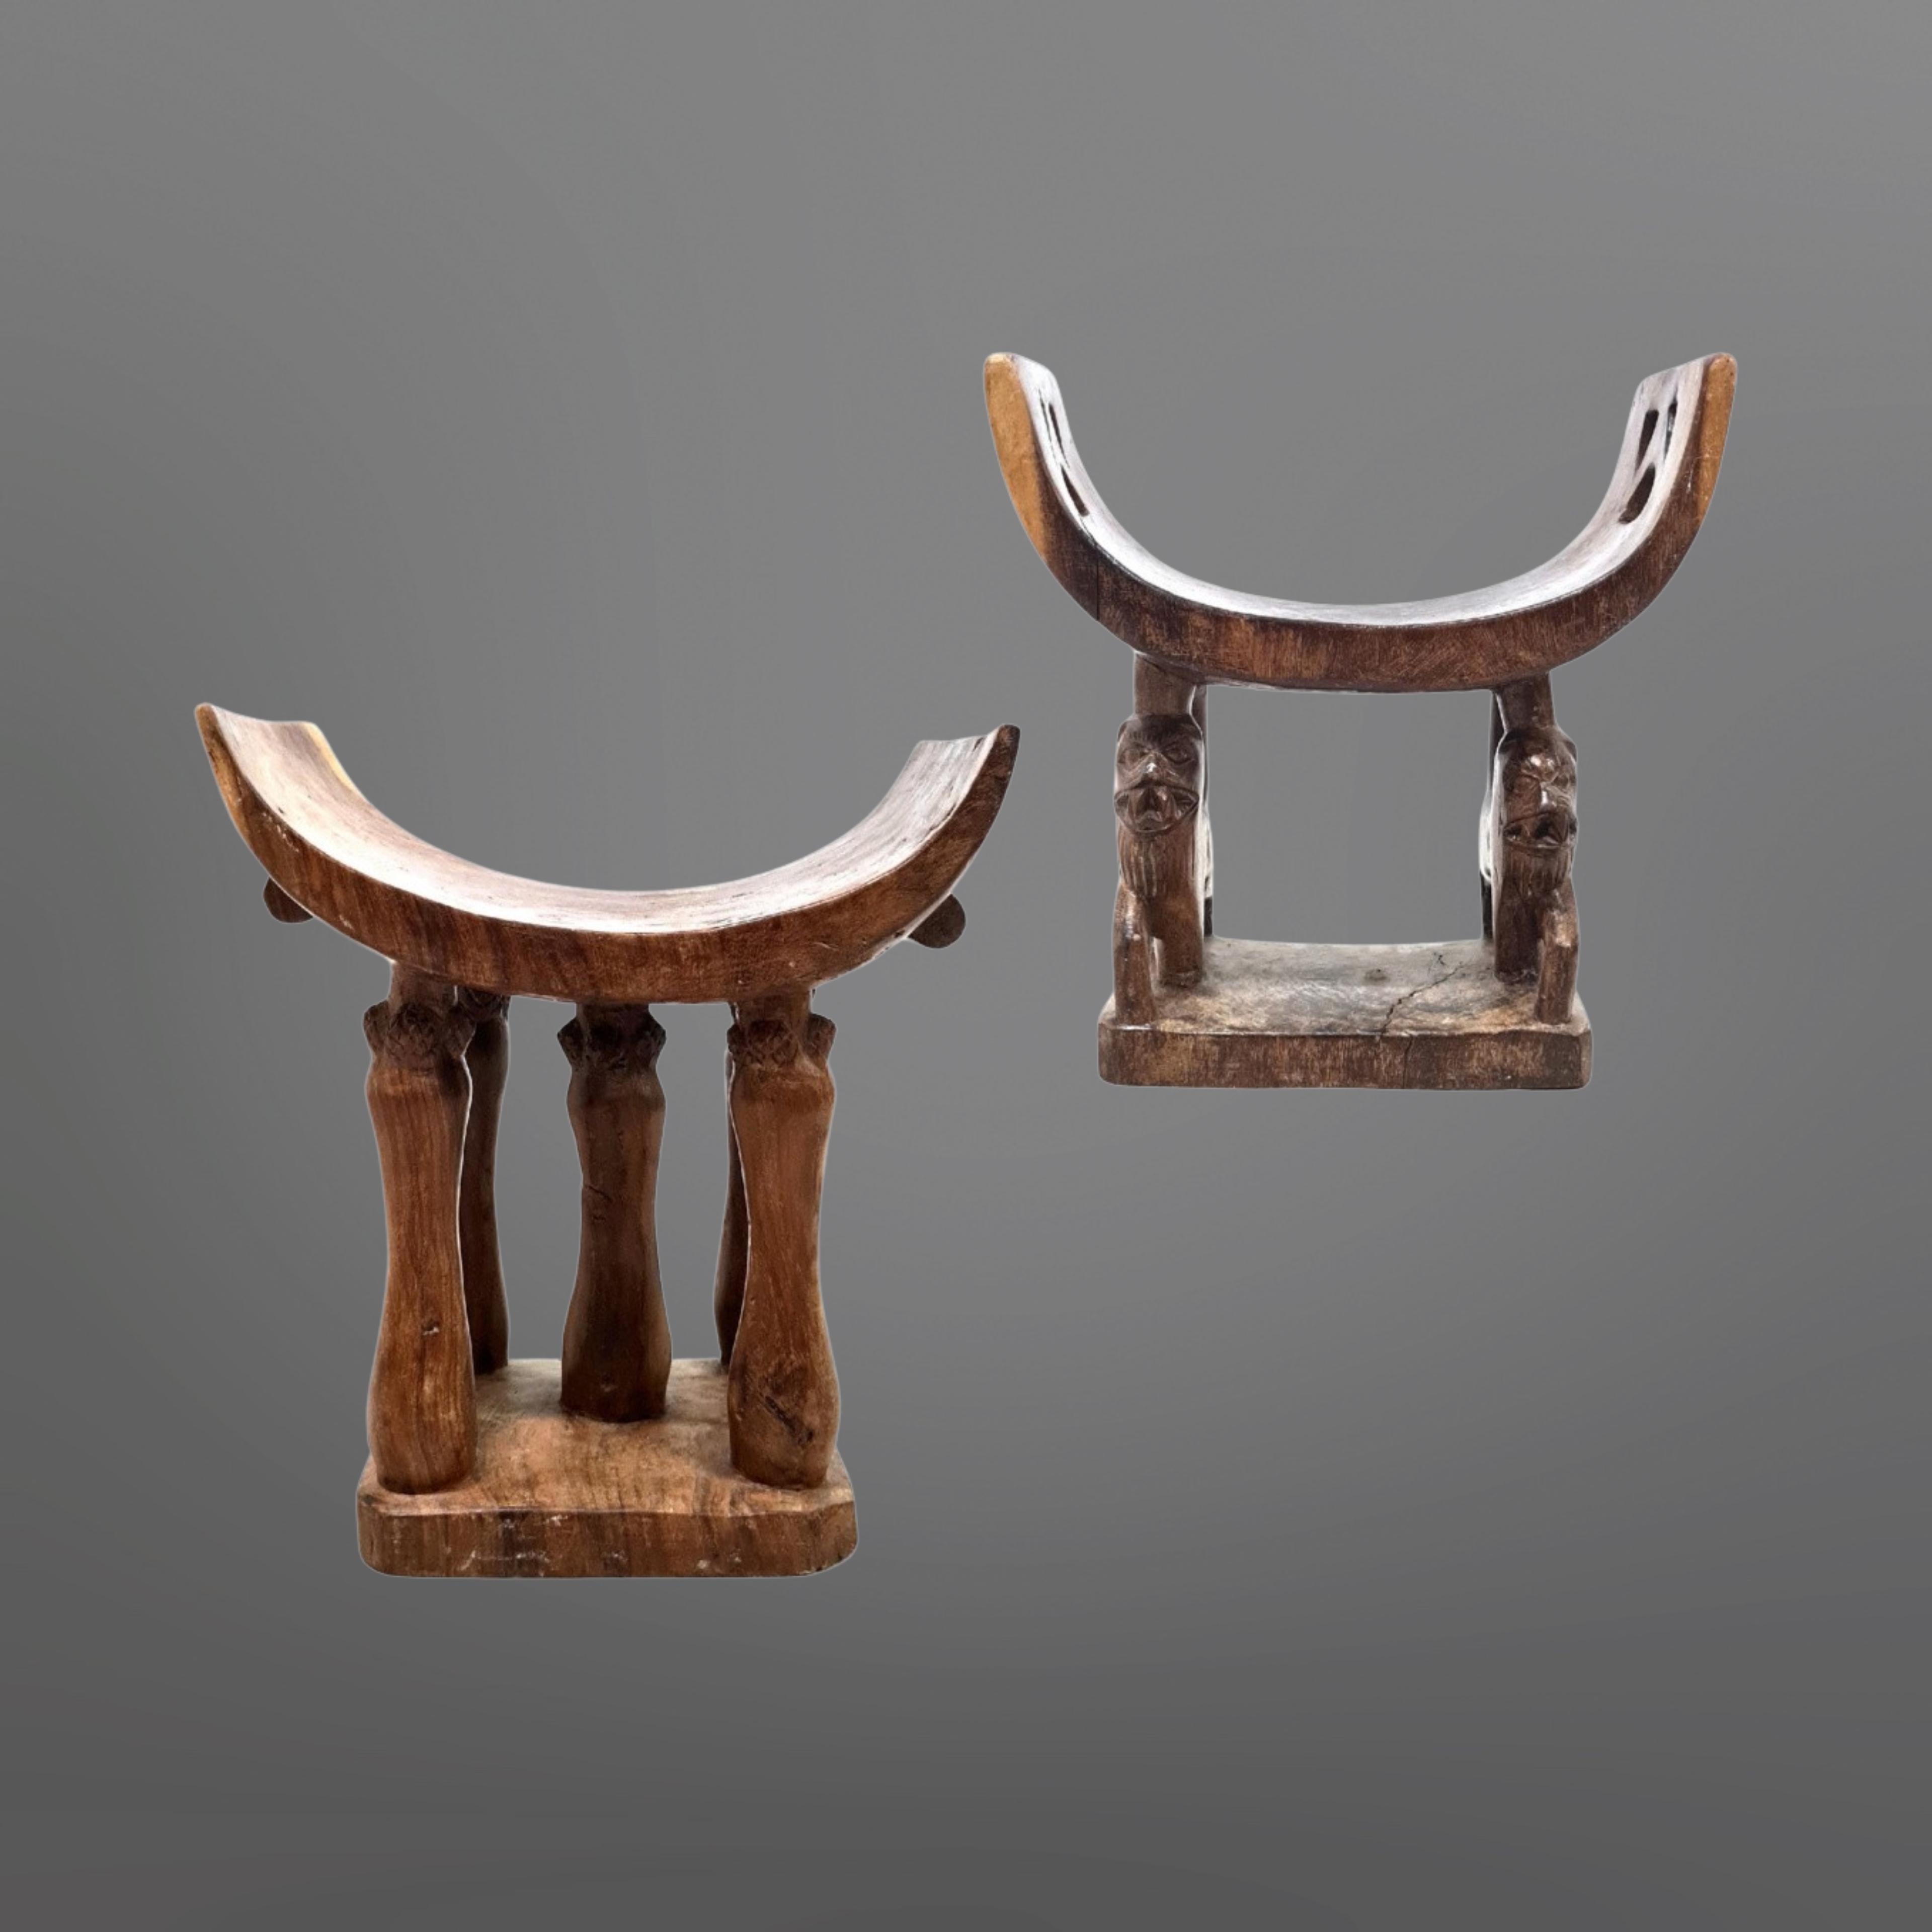 Set of two hardwood stools. Hand carved by the Asante or Ashanti tribe of Ghana. Attractive sculptural pieces with beautiful woodgrain and natural colors. Both stools are in very good condition. They show natural occurring cracks and imperfections